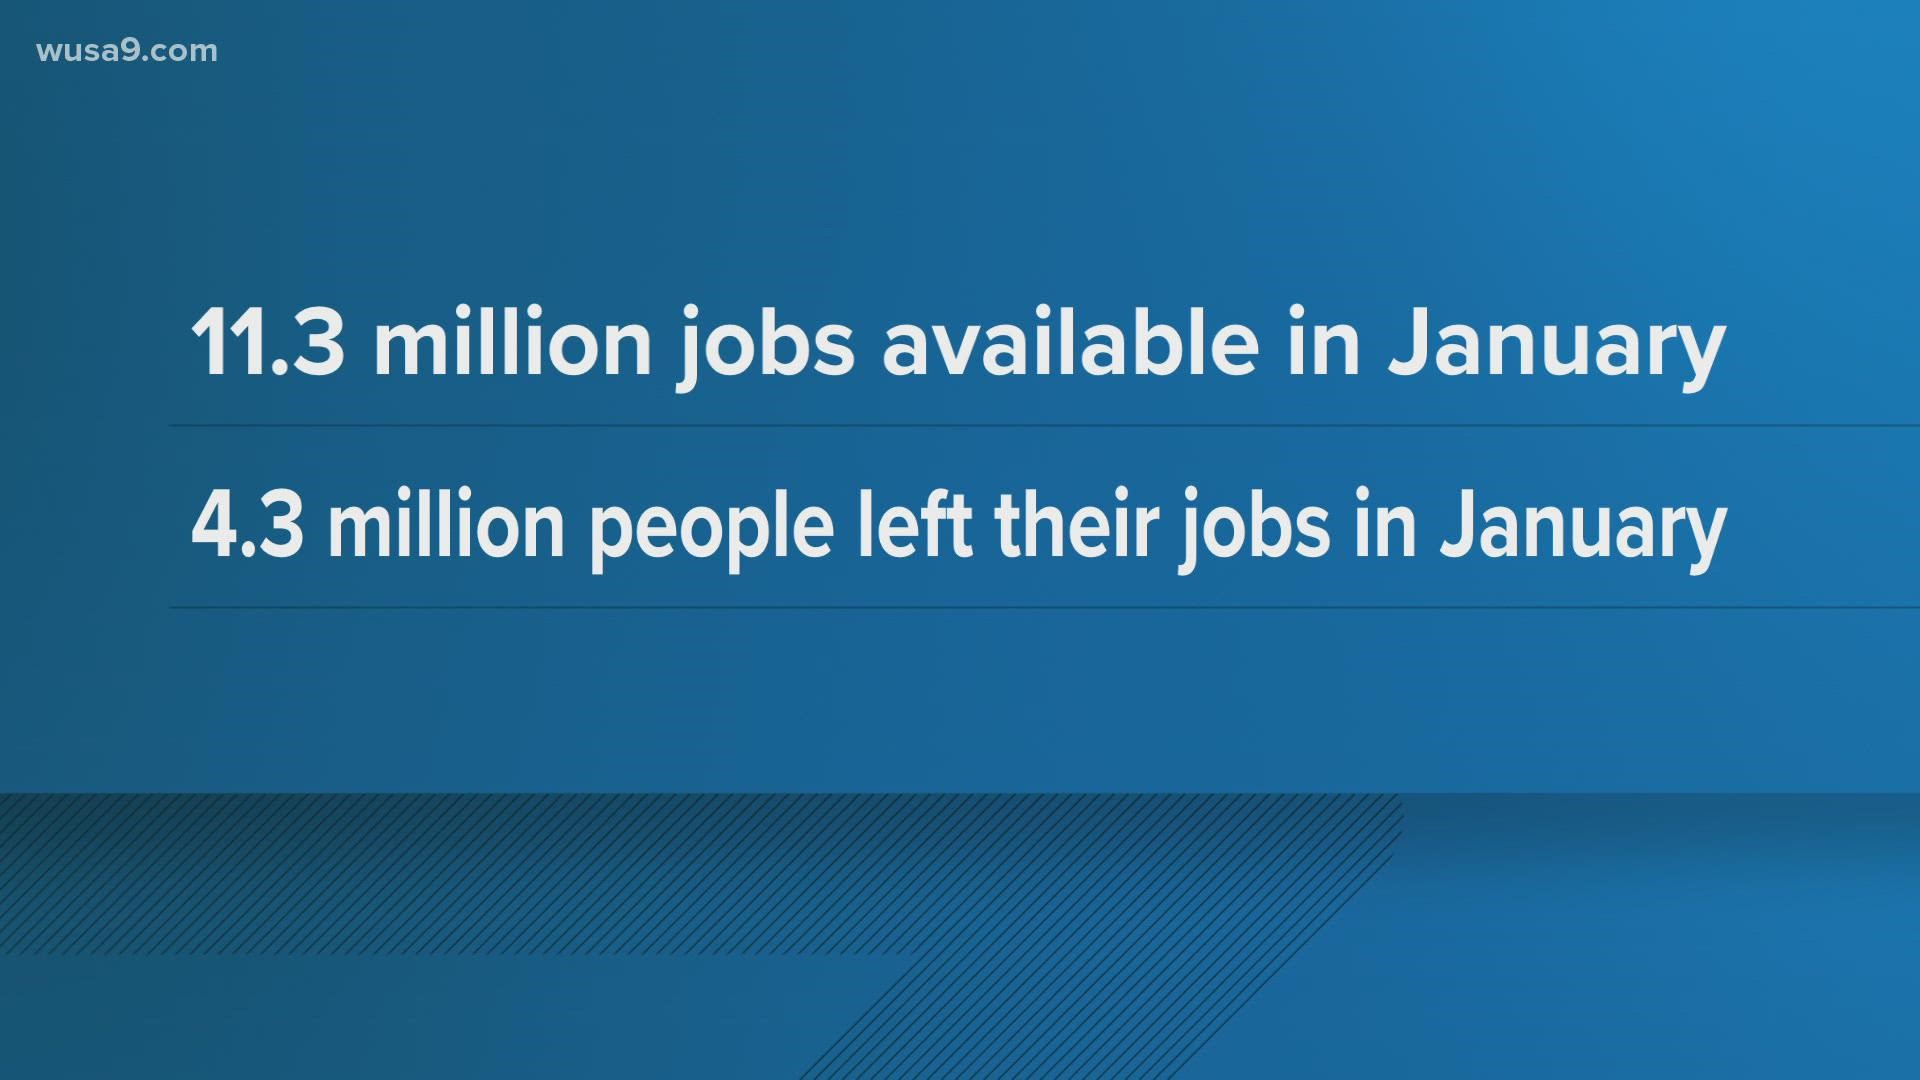 11.3 million jobs were made available in January and 4.3 million people left their jobs that month, so workers still have the upper hand.